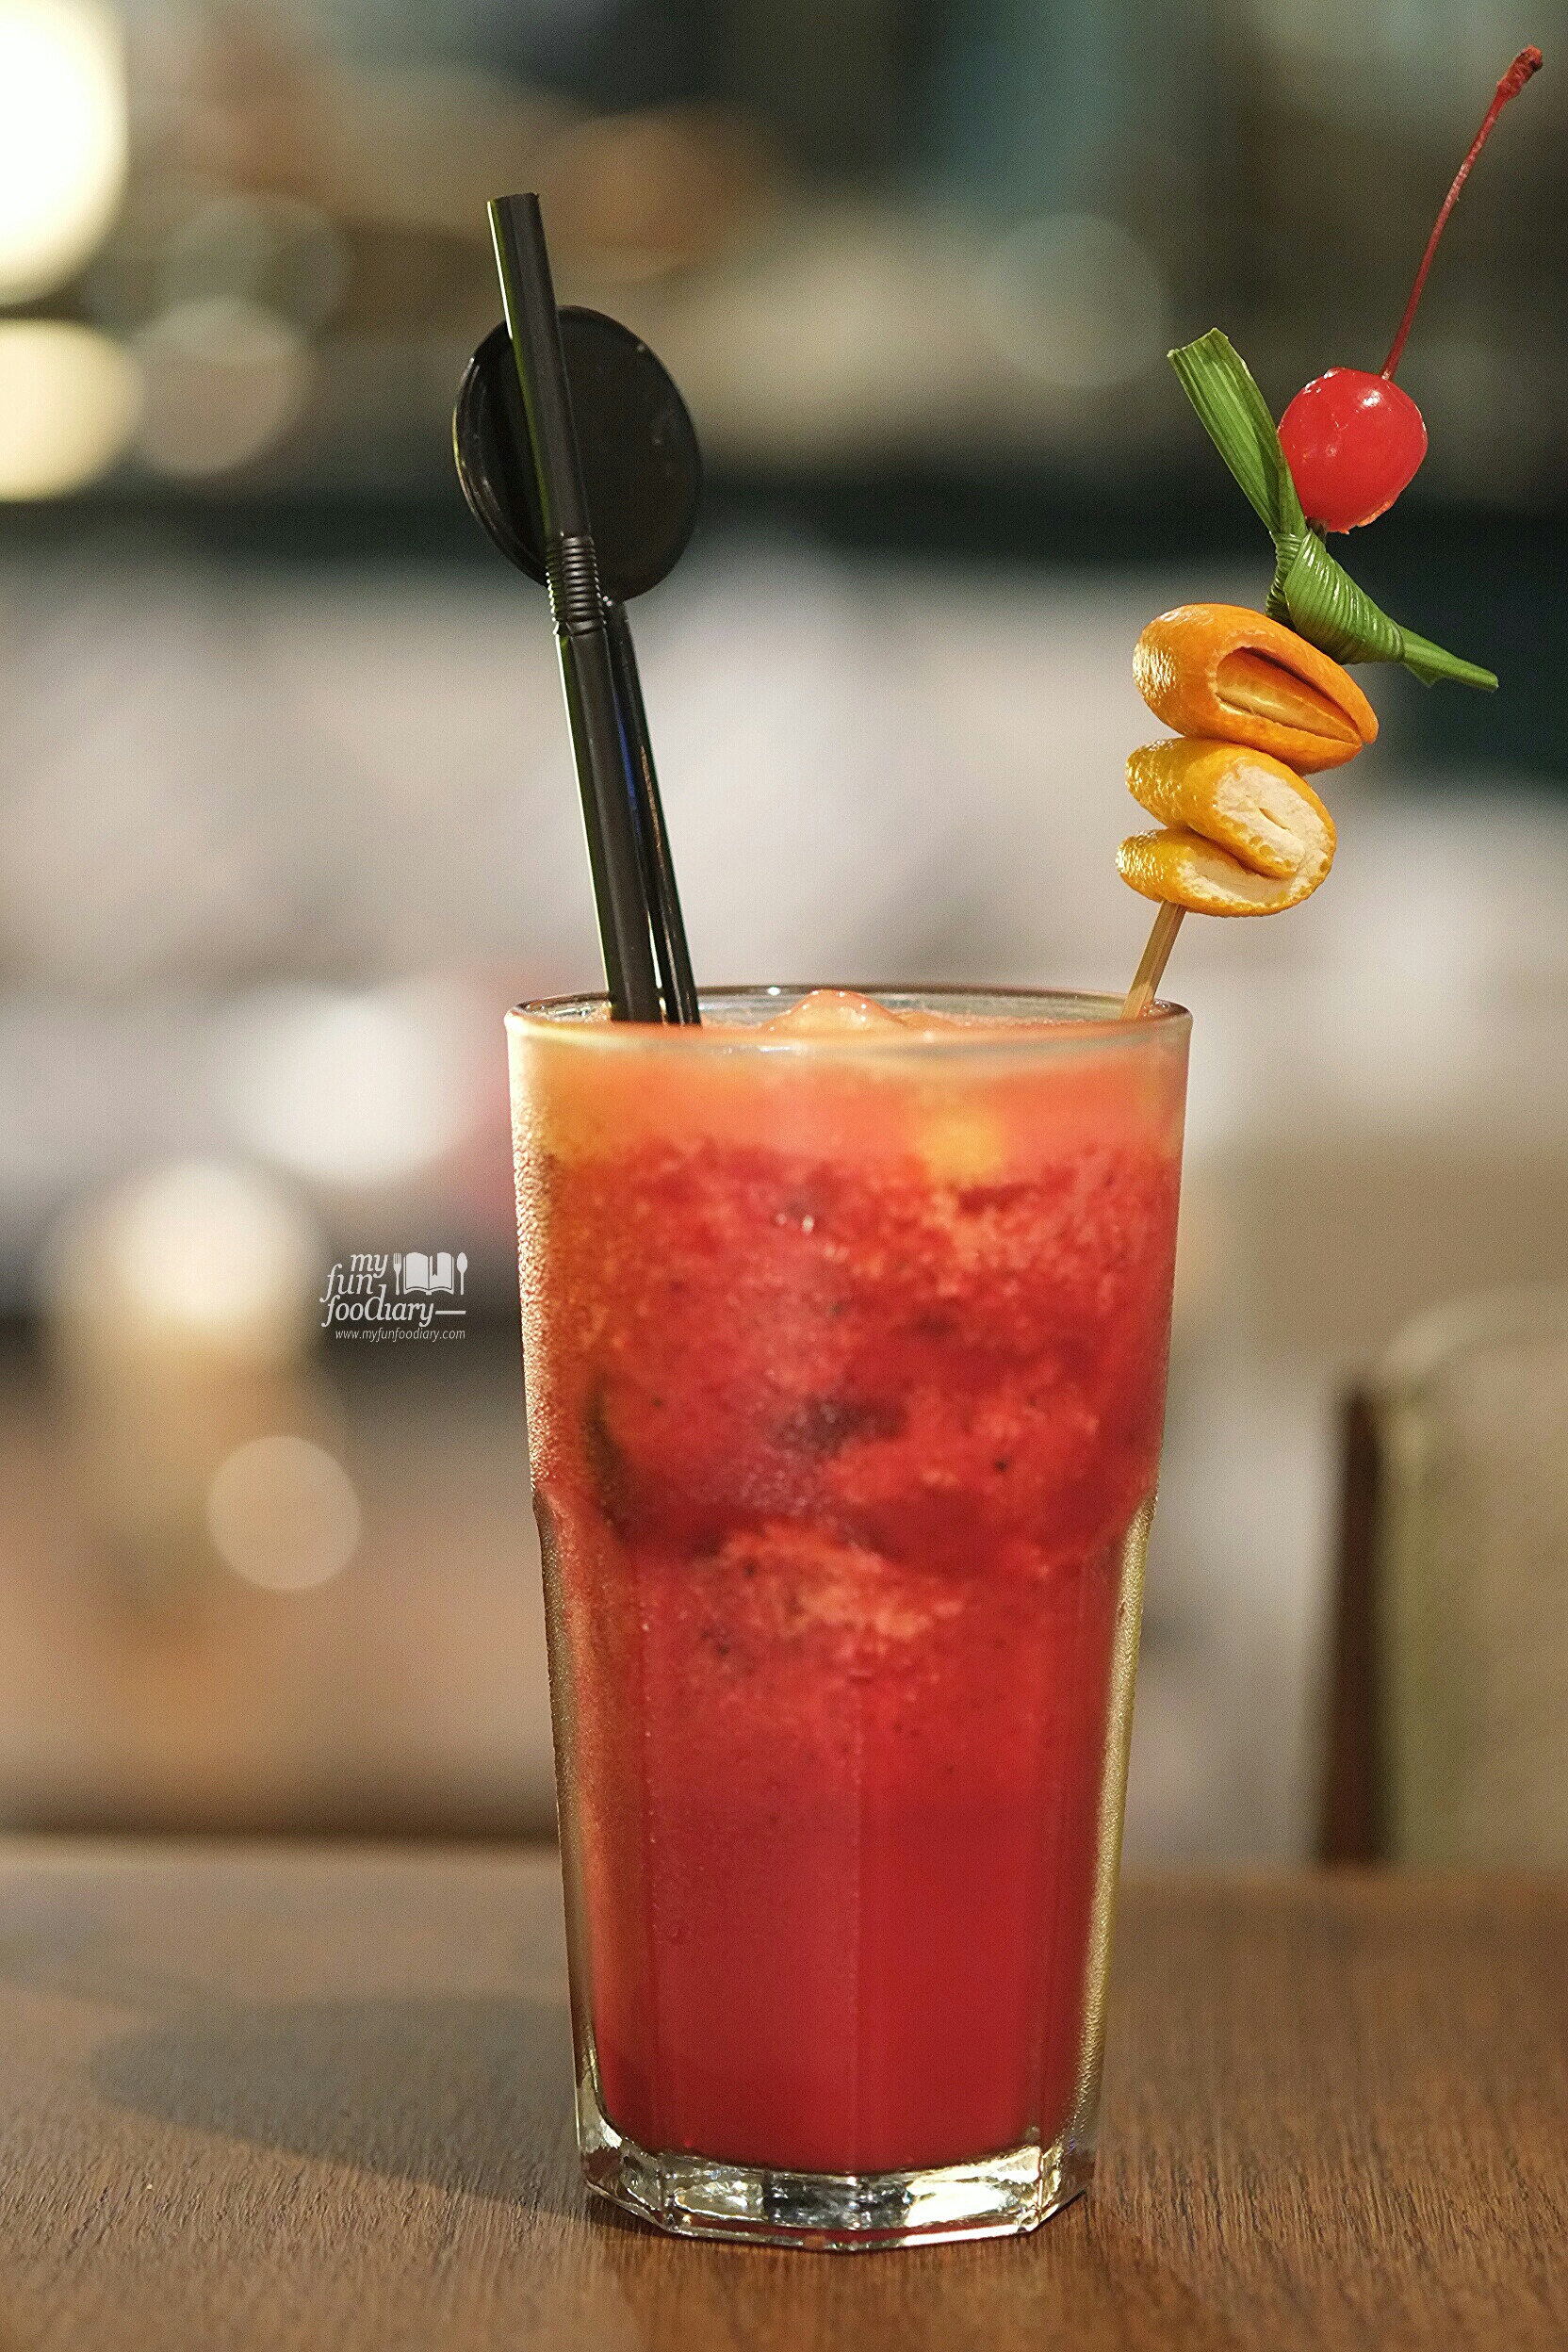 Doctor Red Juice at Commune Bistro & Grill by Myfunfoodiary